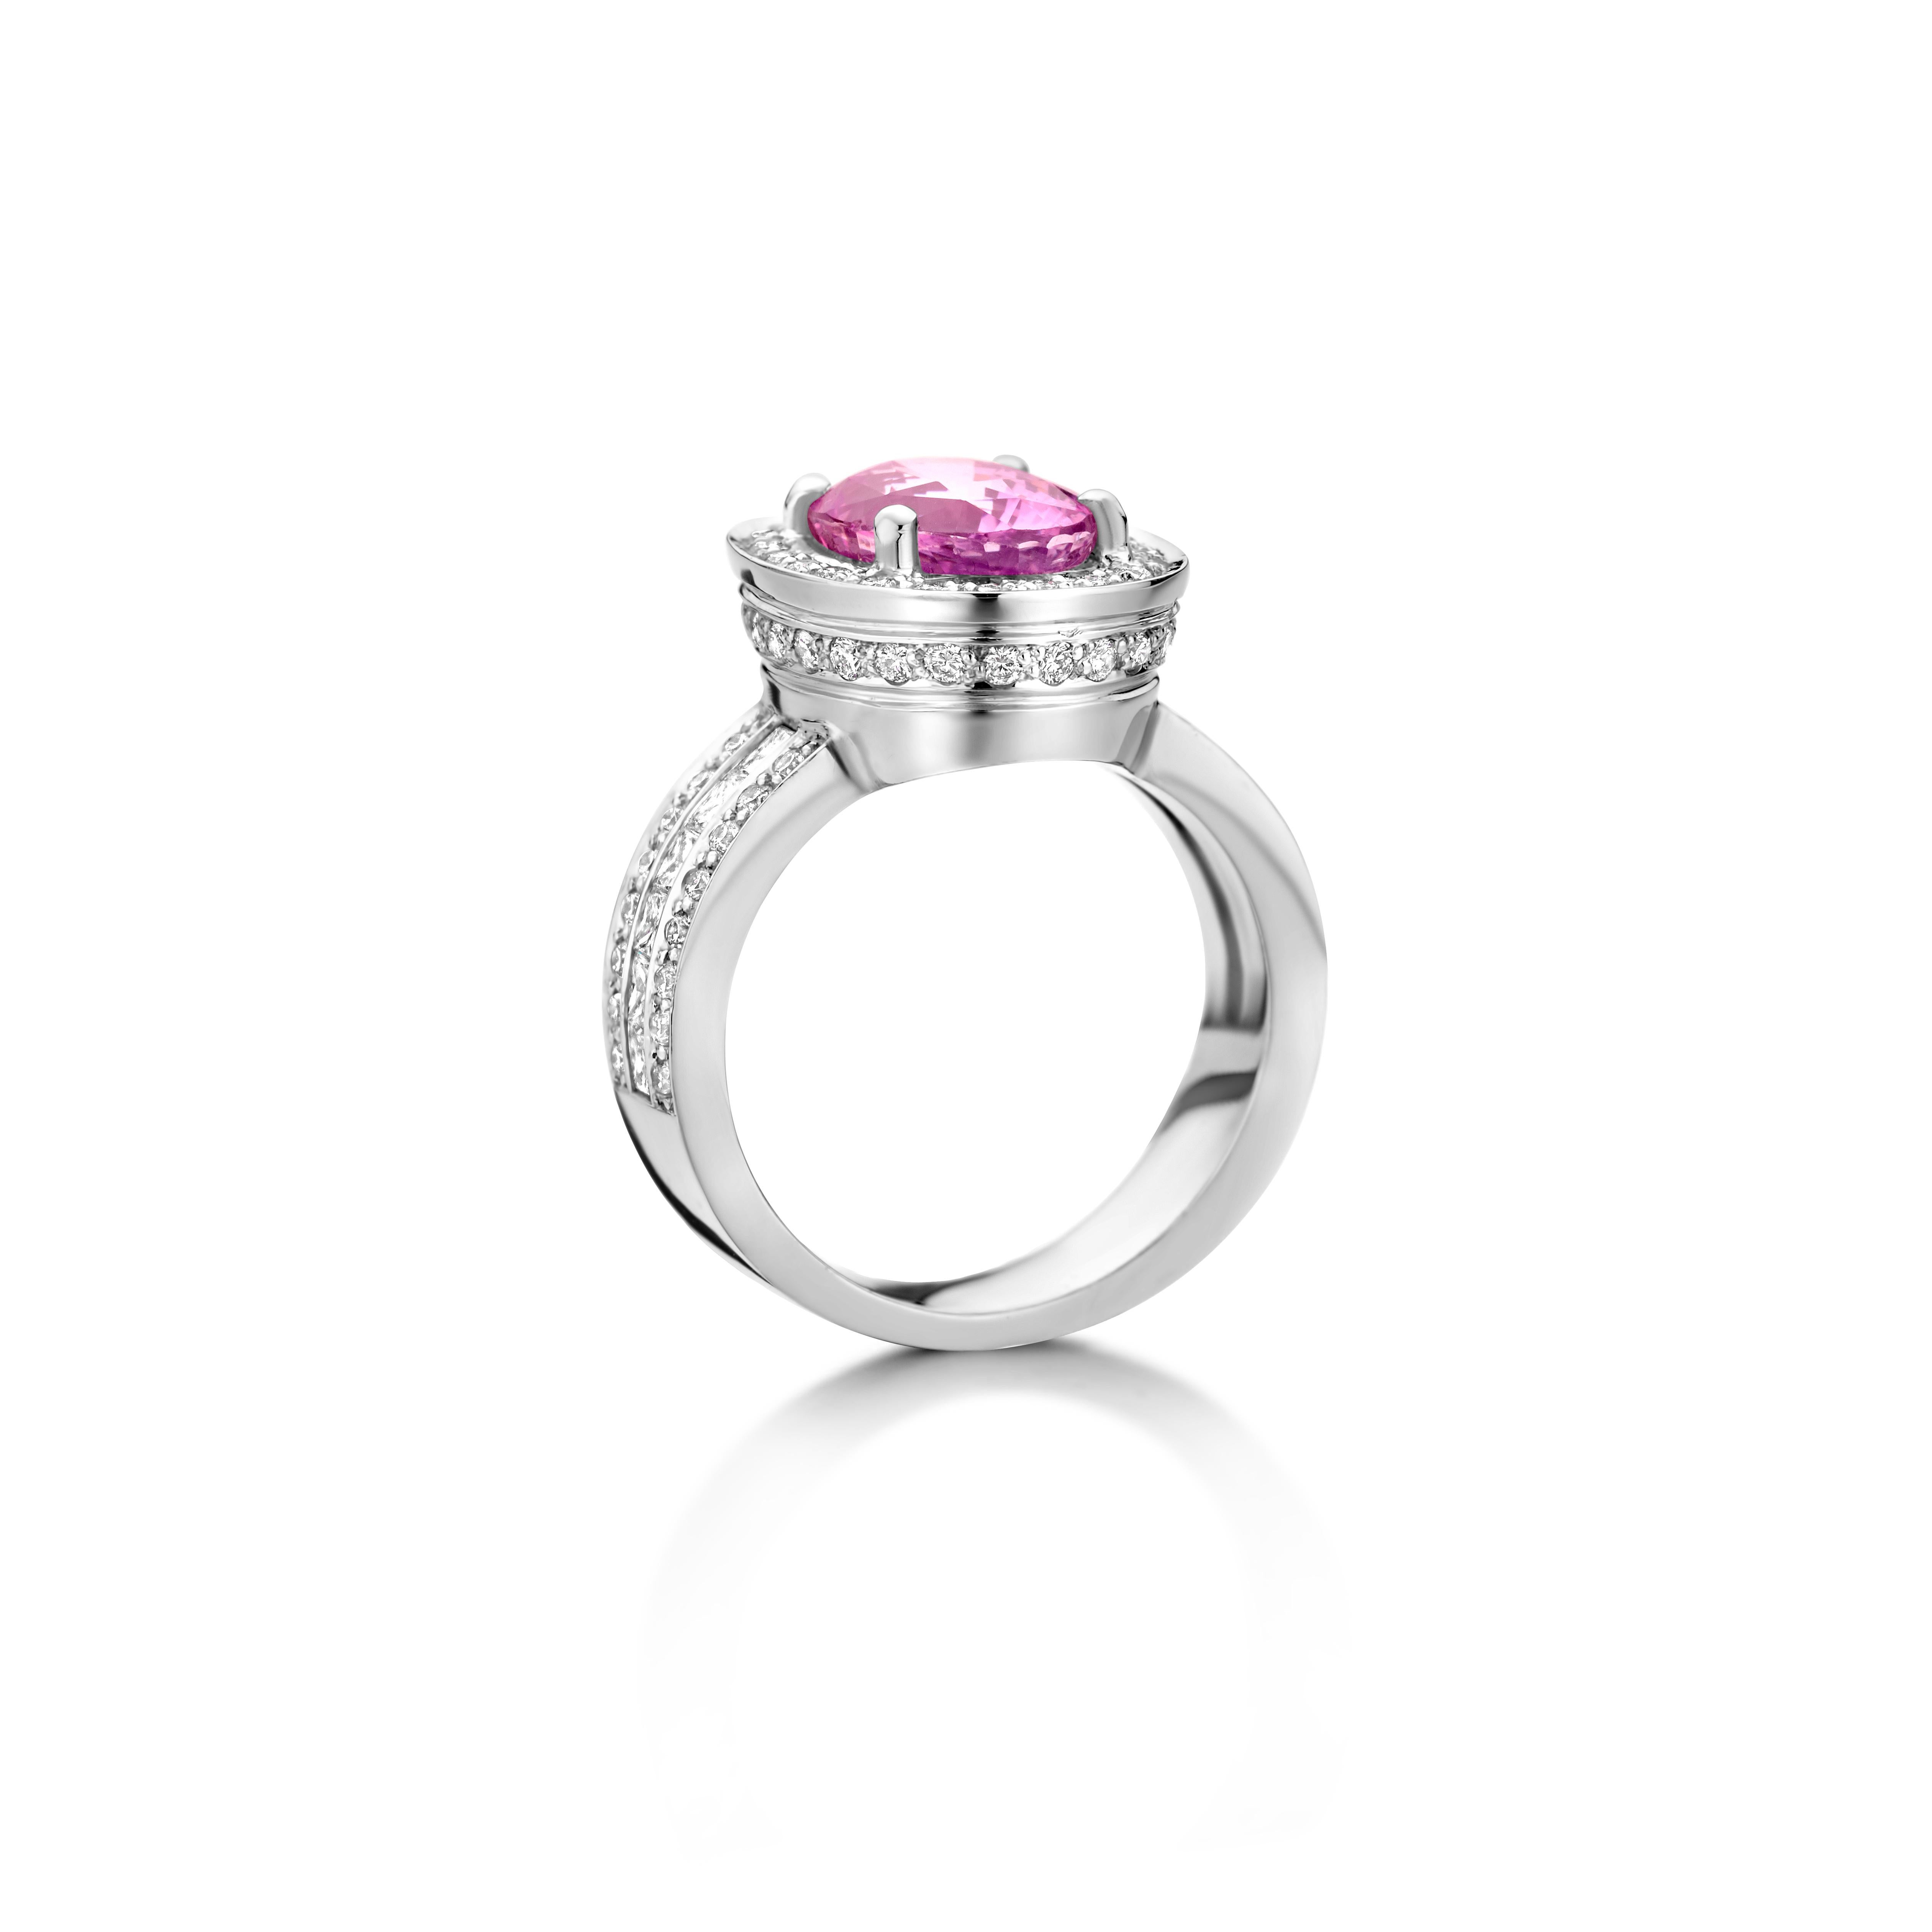 One of a kind cocktail ring in 18K white gold (10,3g) set with 1 natural eye clean oval unheated vivid pink sapphire. This ring is set with 12 princes cut diamonds 0.55Ct and 79 brilliant cut diamonds 0.79Ct in VS-FG quality

Celine Roelens, a